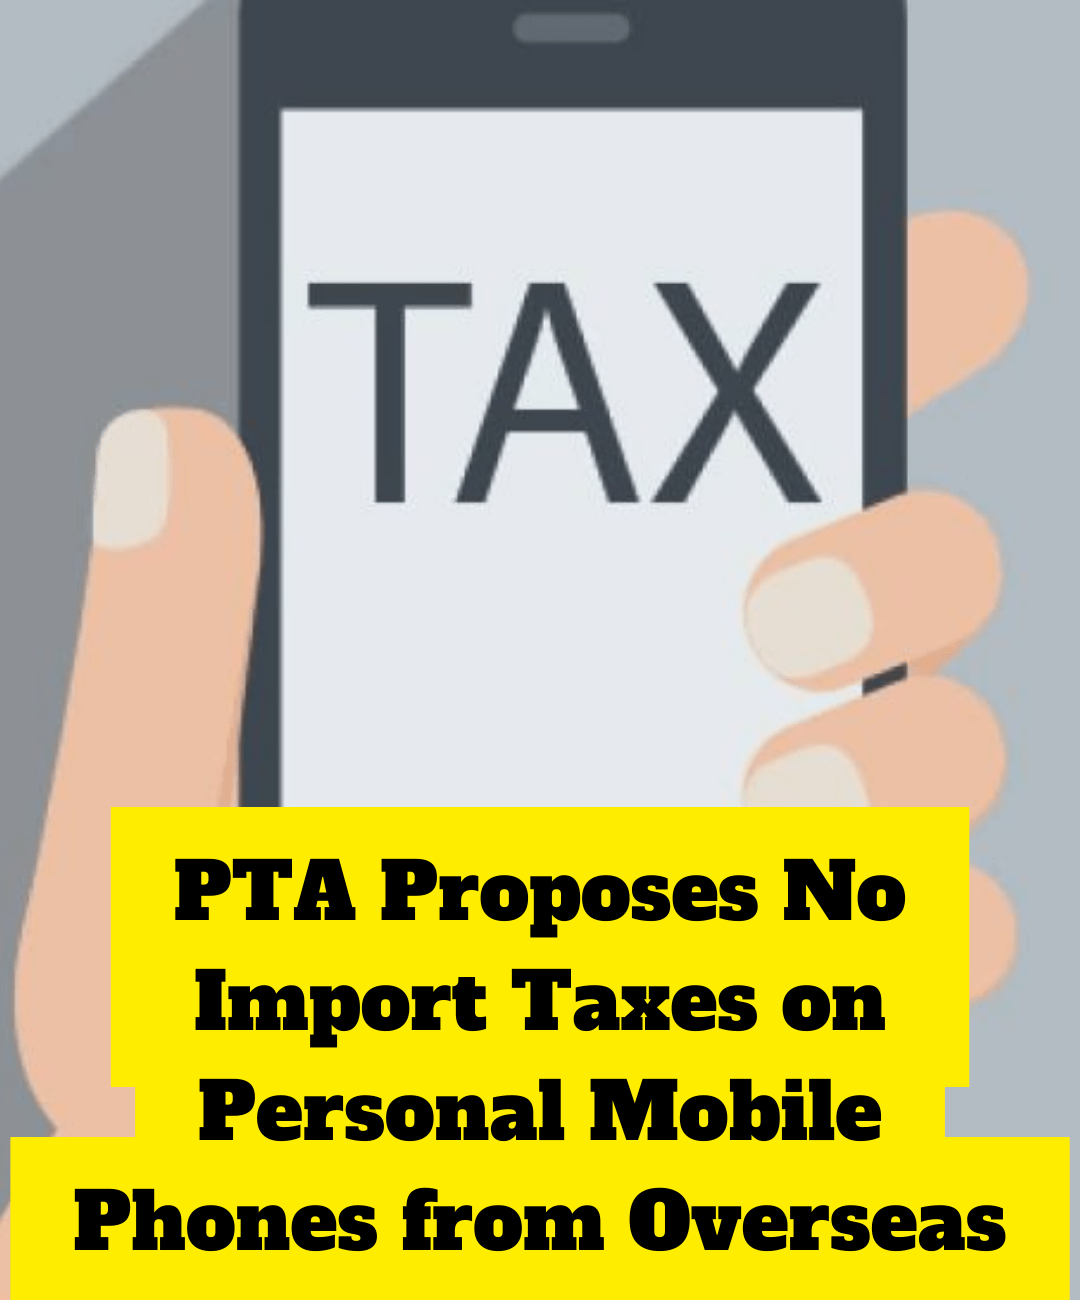 PTA Proposes No Import Taxes on Overseas Personal Mobile Phones